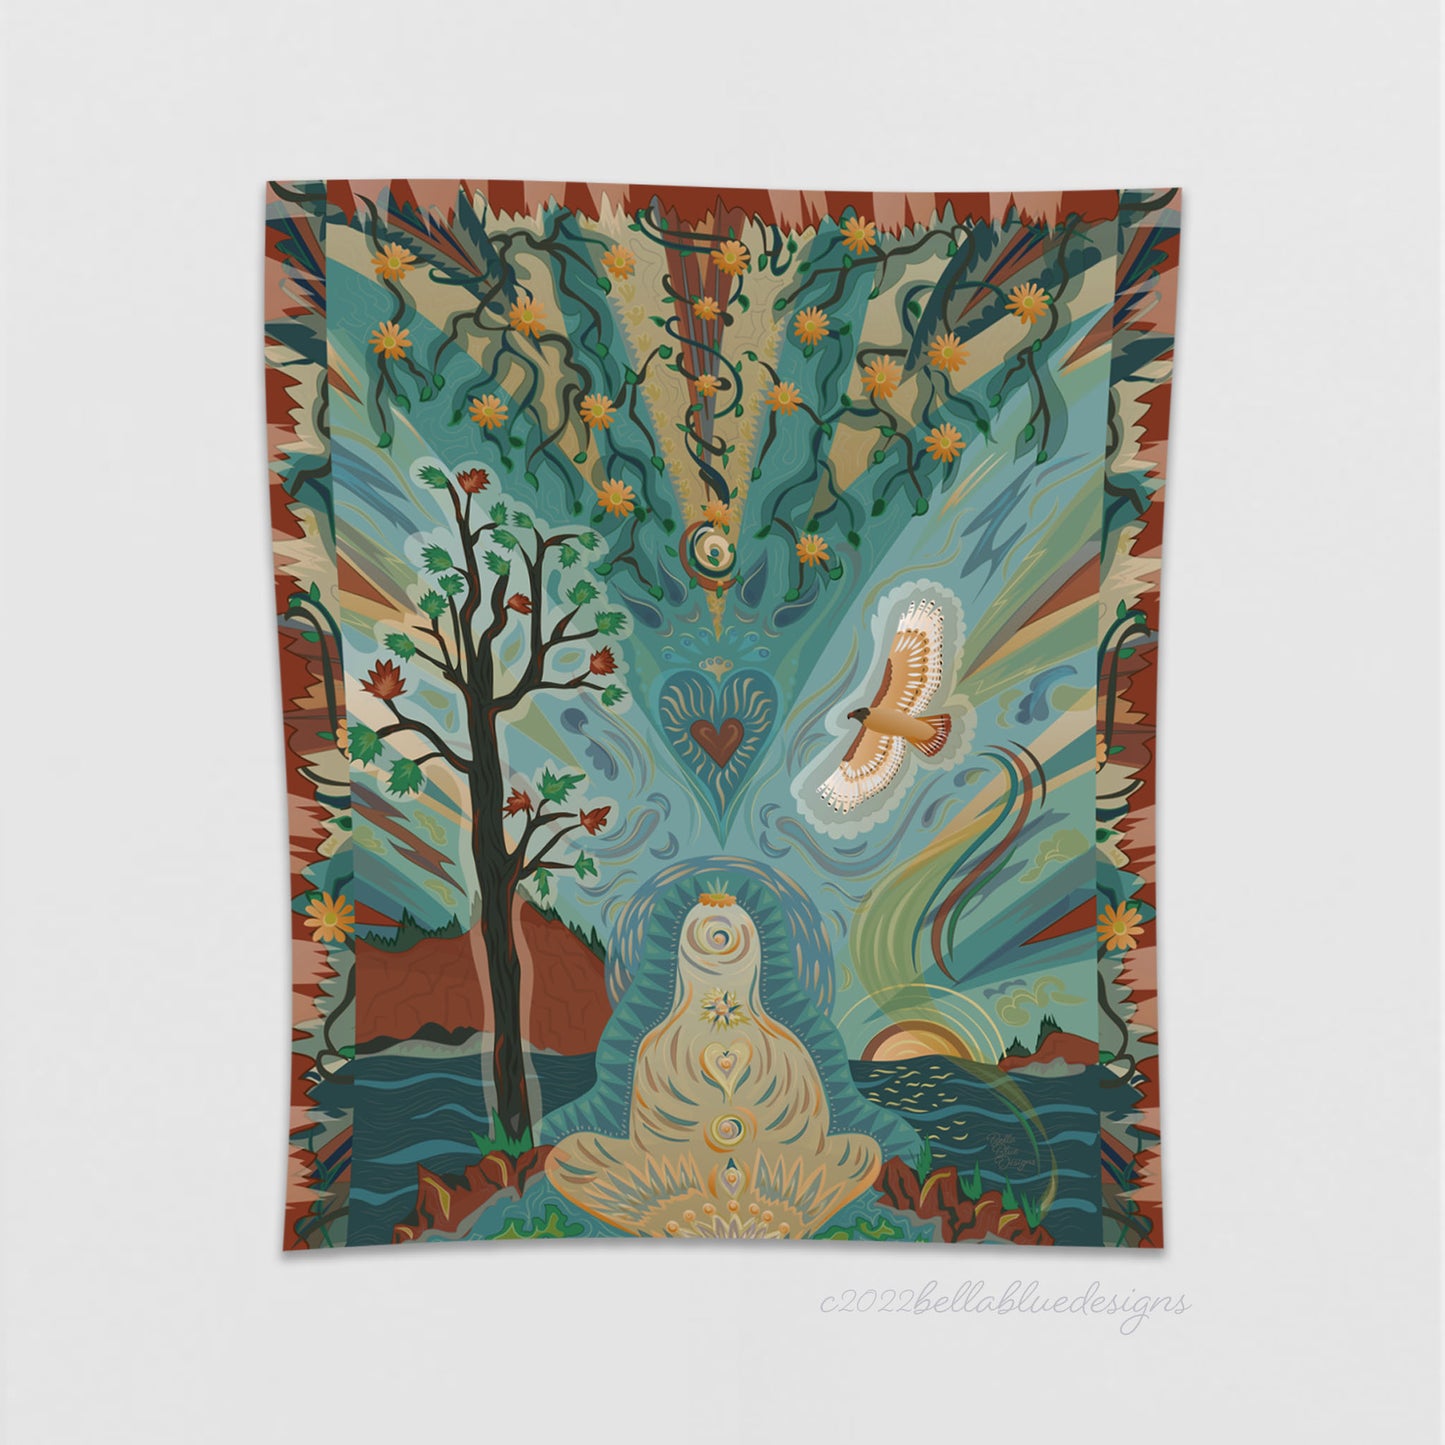 mockup for tapestry with digital design showing an imaginary illustration of a person in buddha pose beneath a tree and a design in the sky